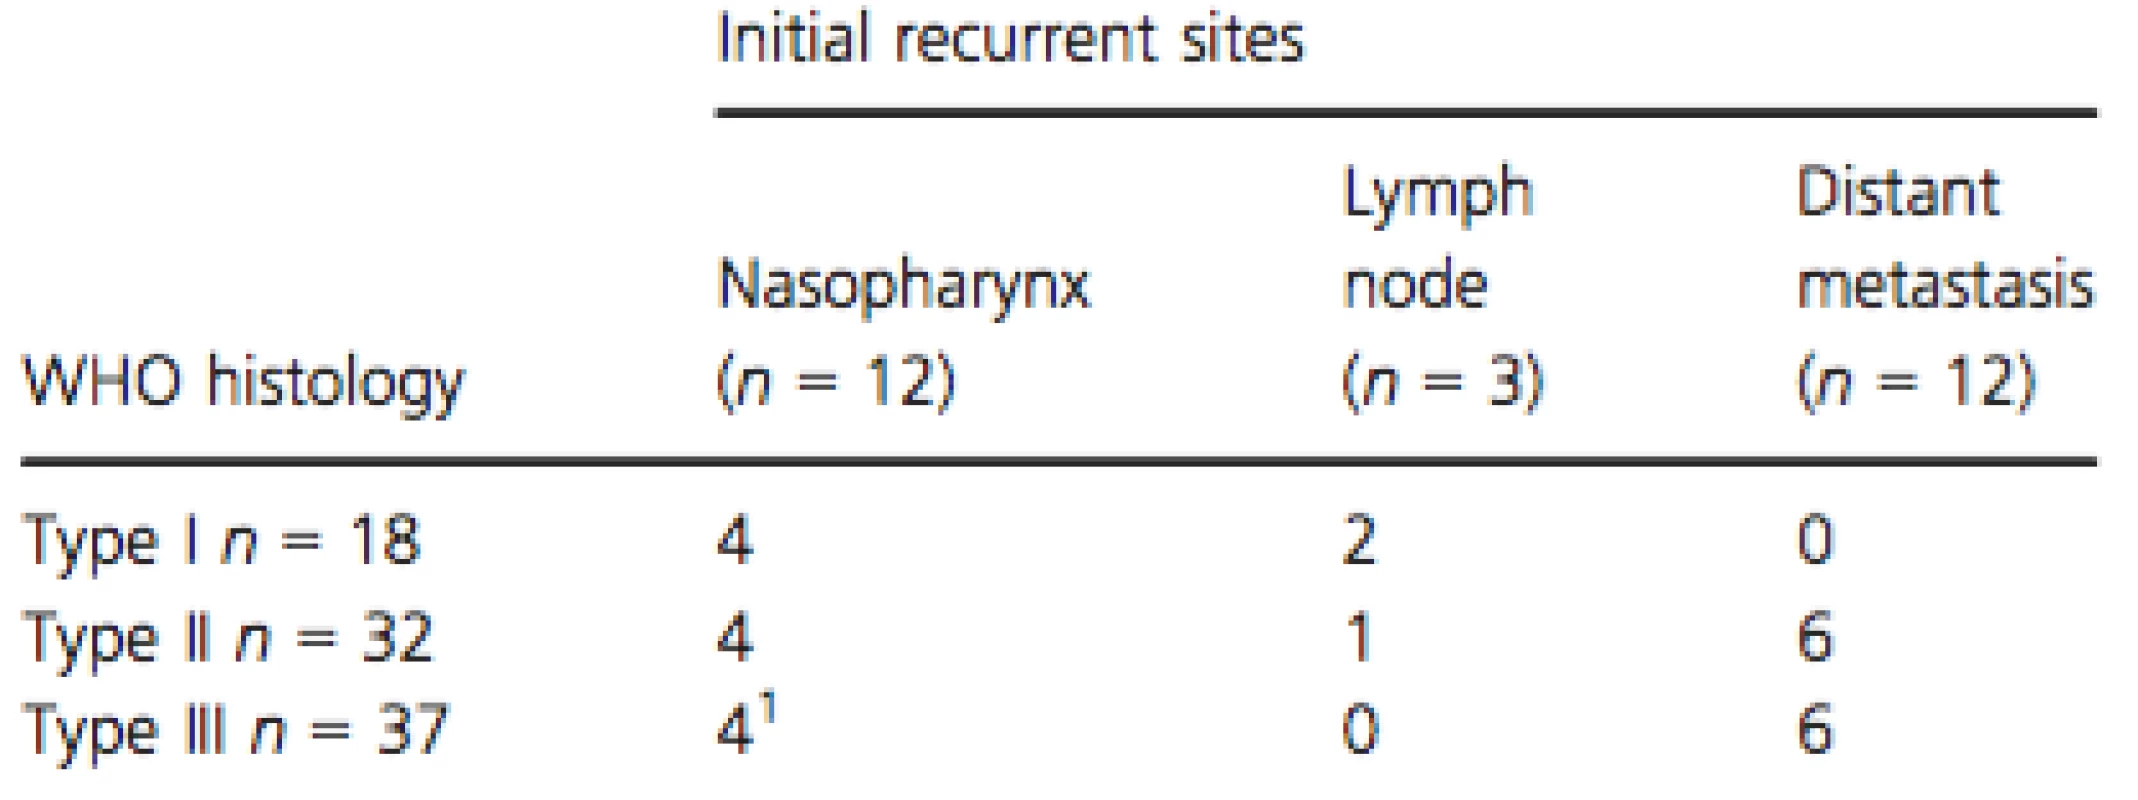 Initial recurrent sites according to WHO histology.